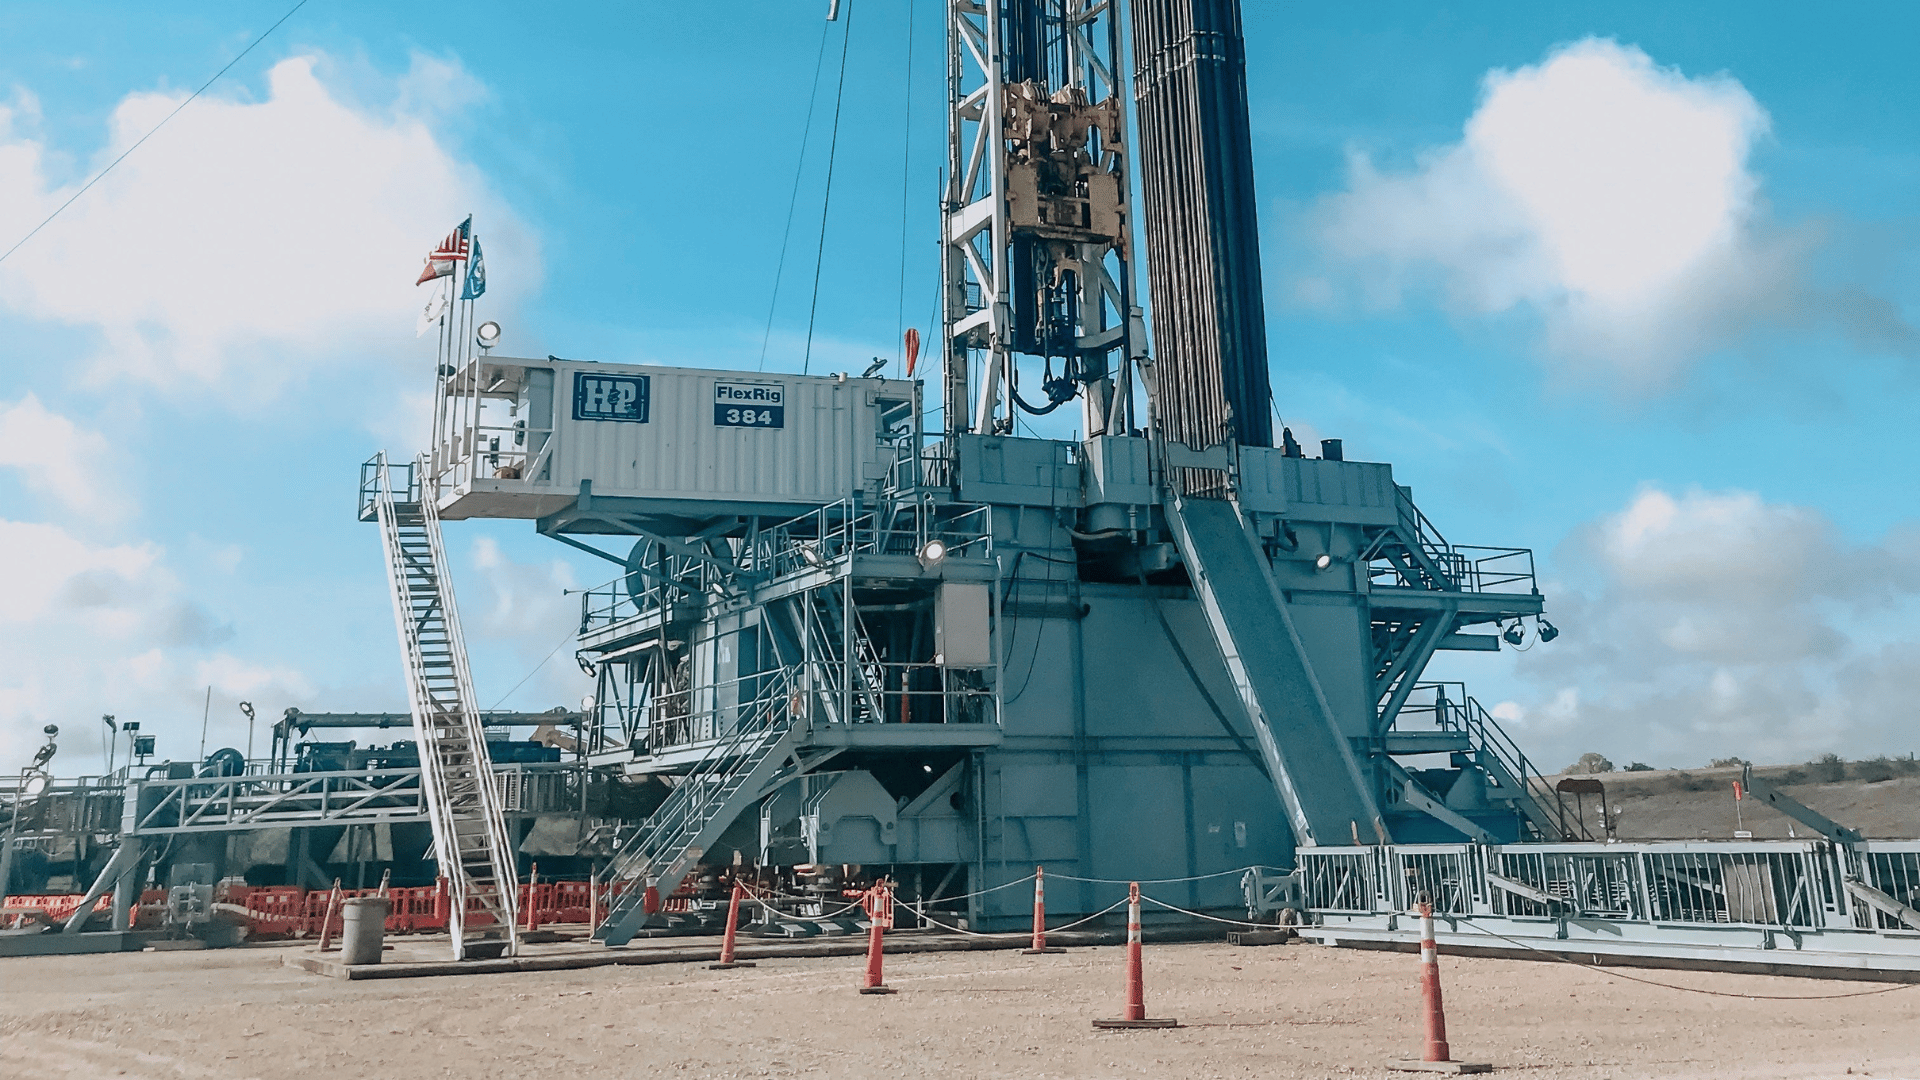 H&P Rig 384 in South Texas